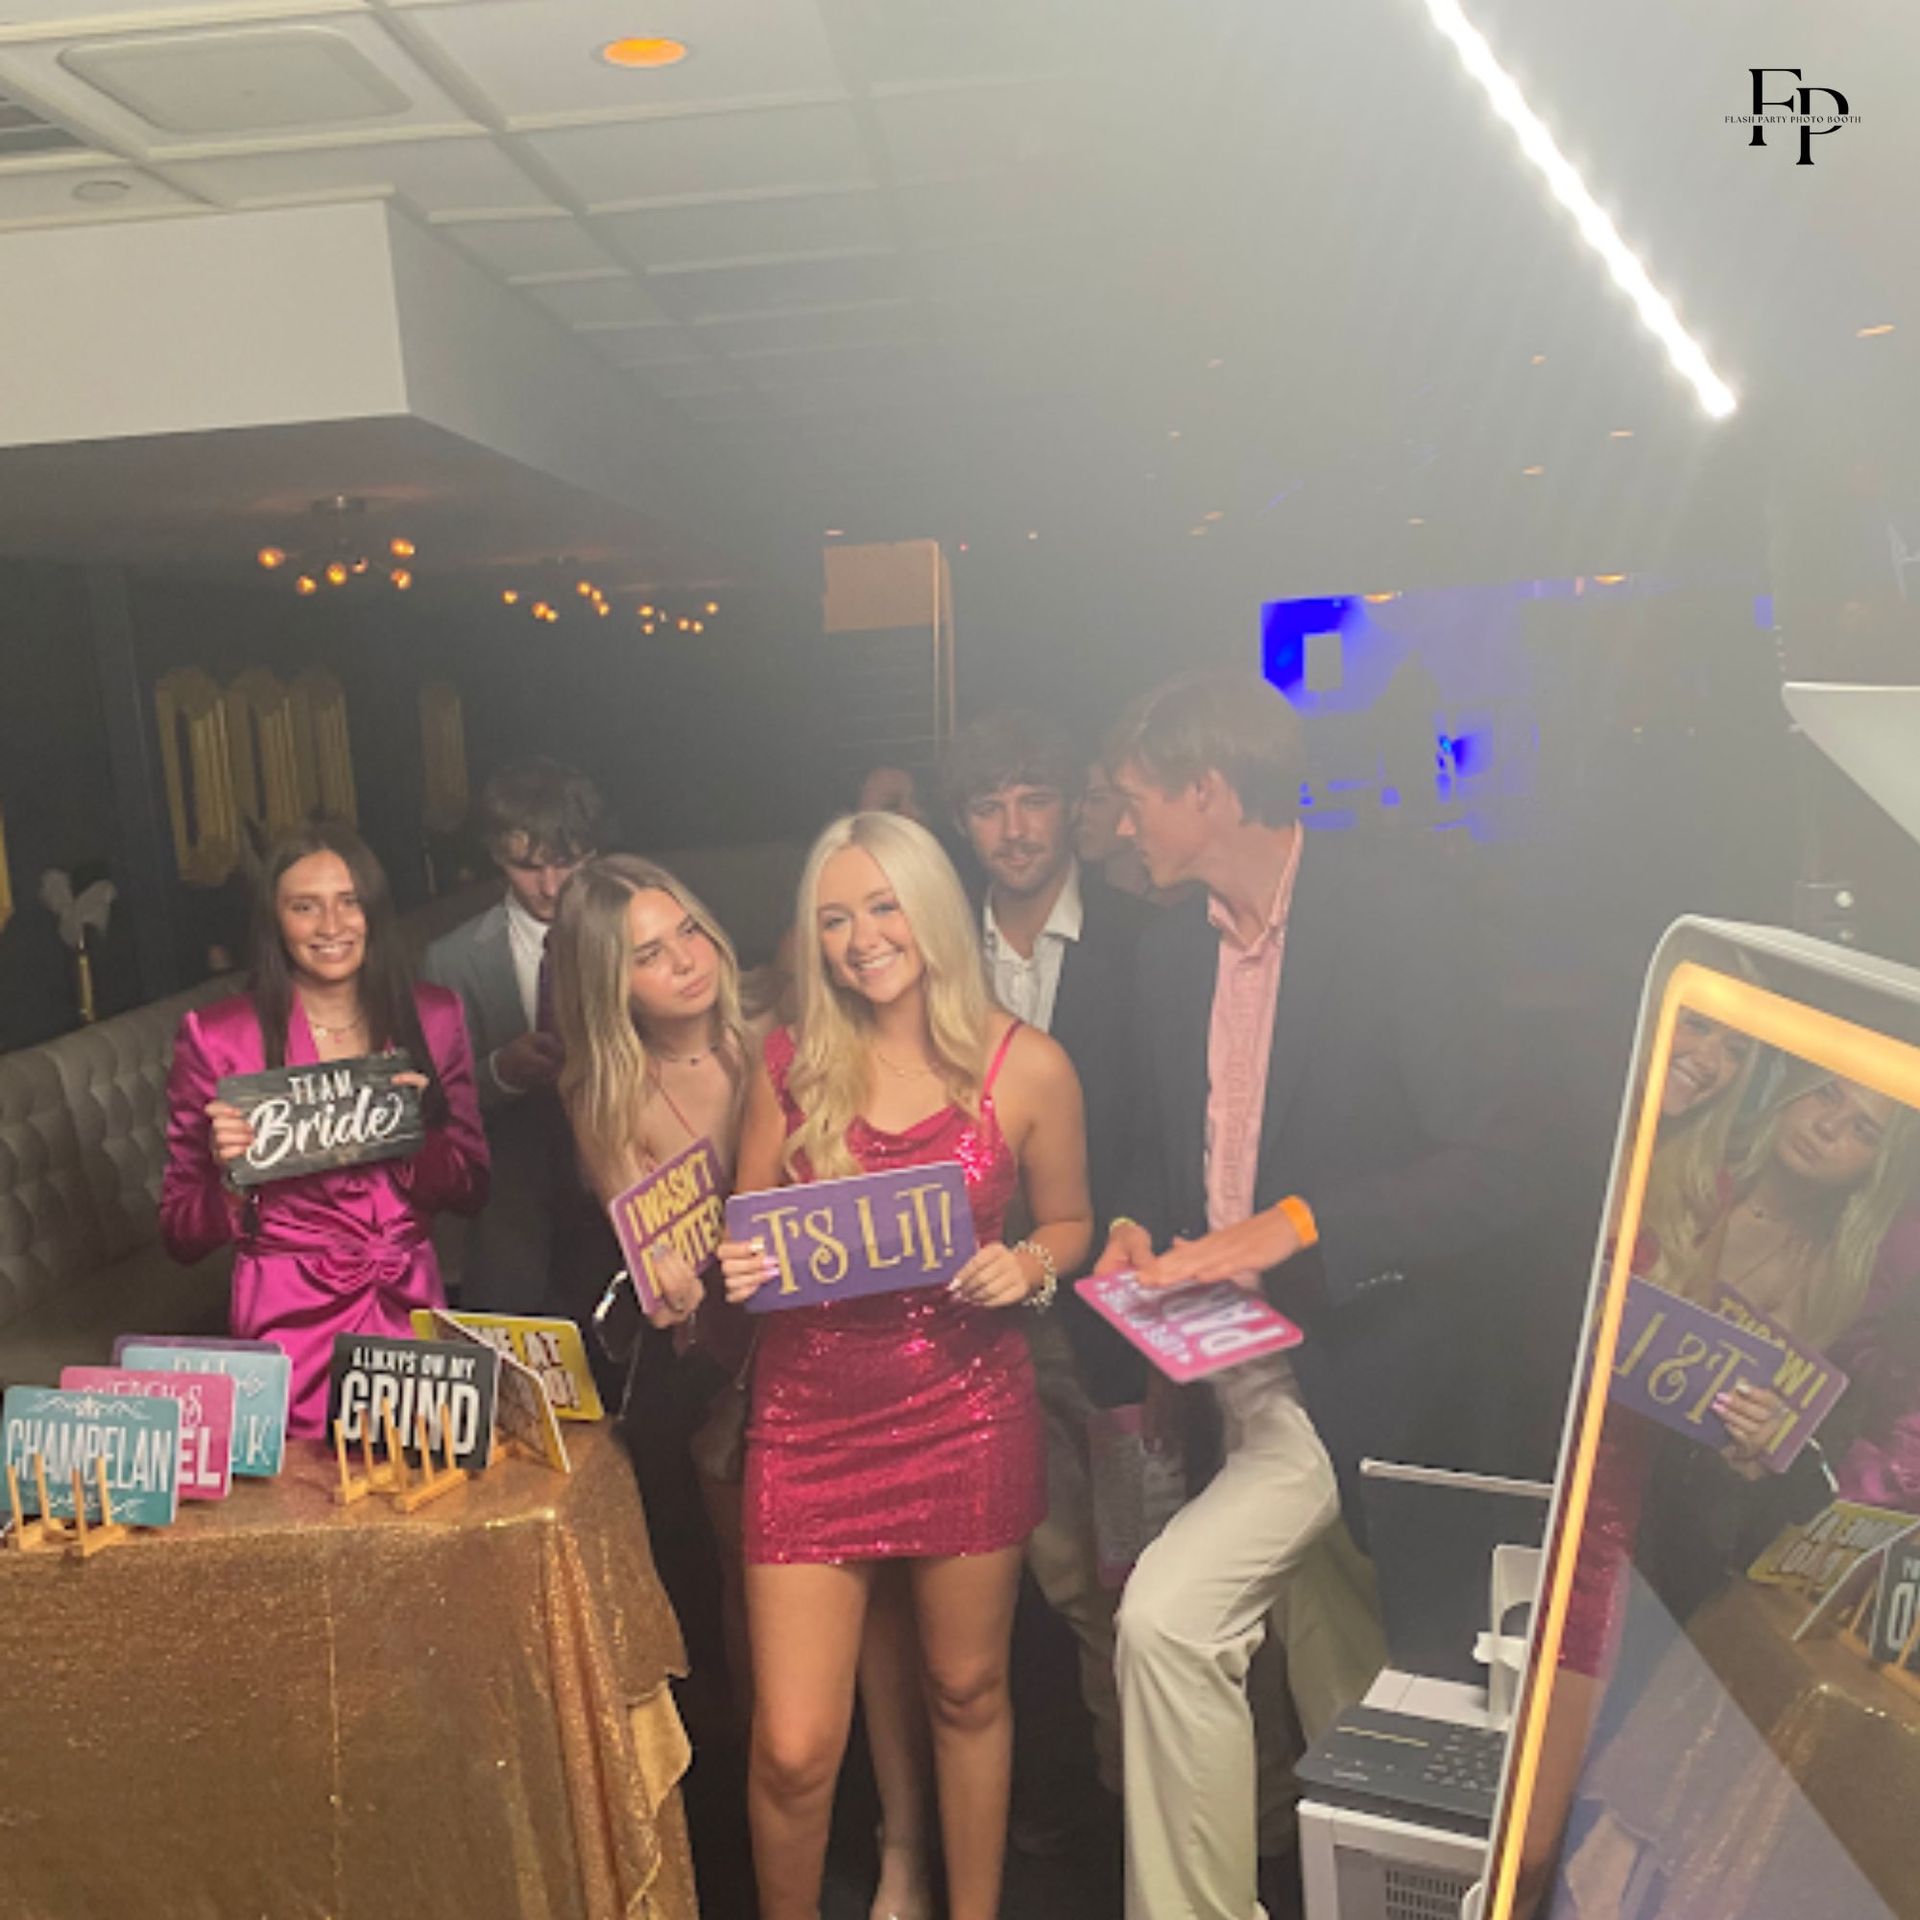 A lively party scene with a group of people cheerfully posing for a photo with the Mirror Photo Booth.